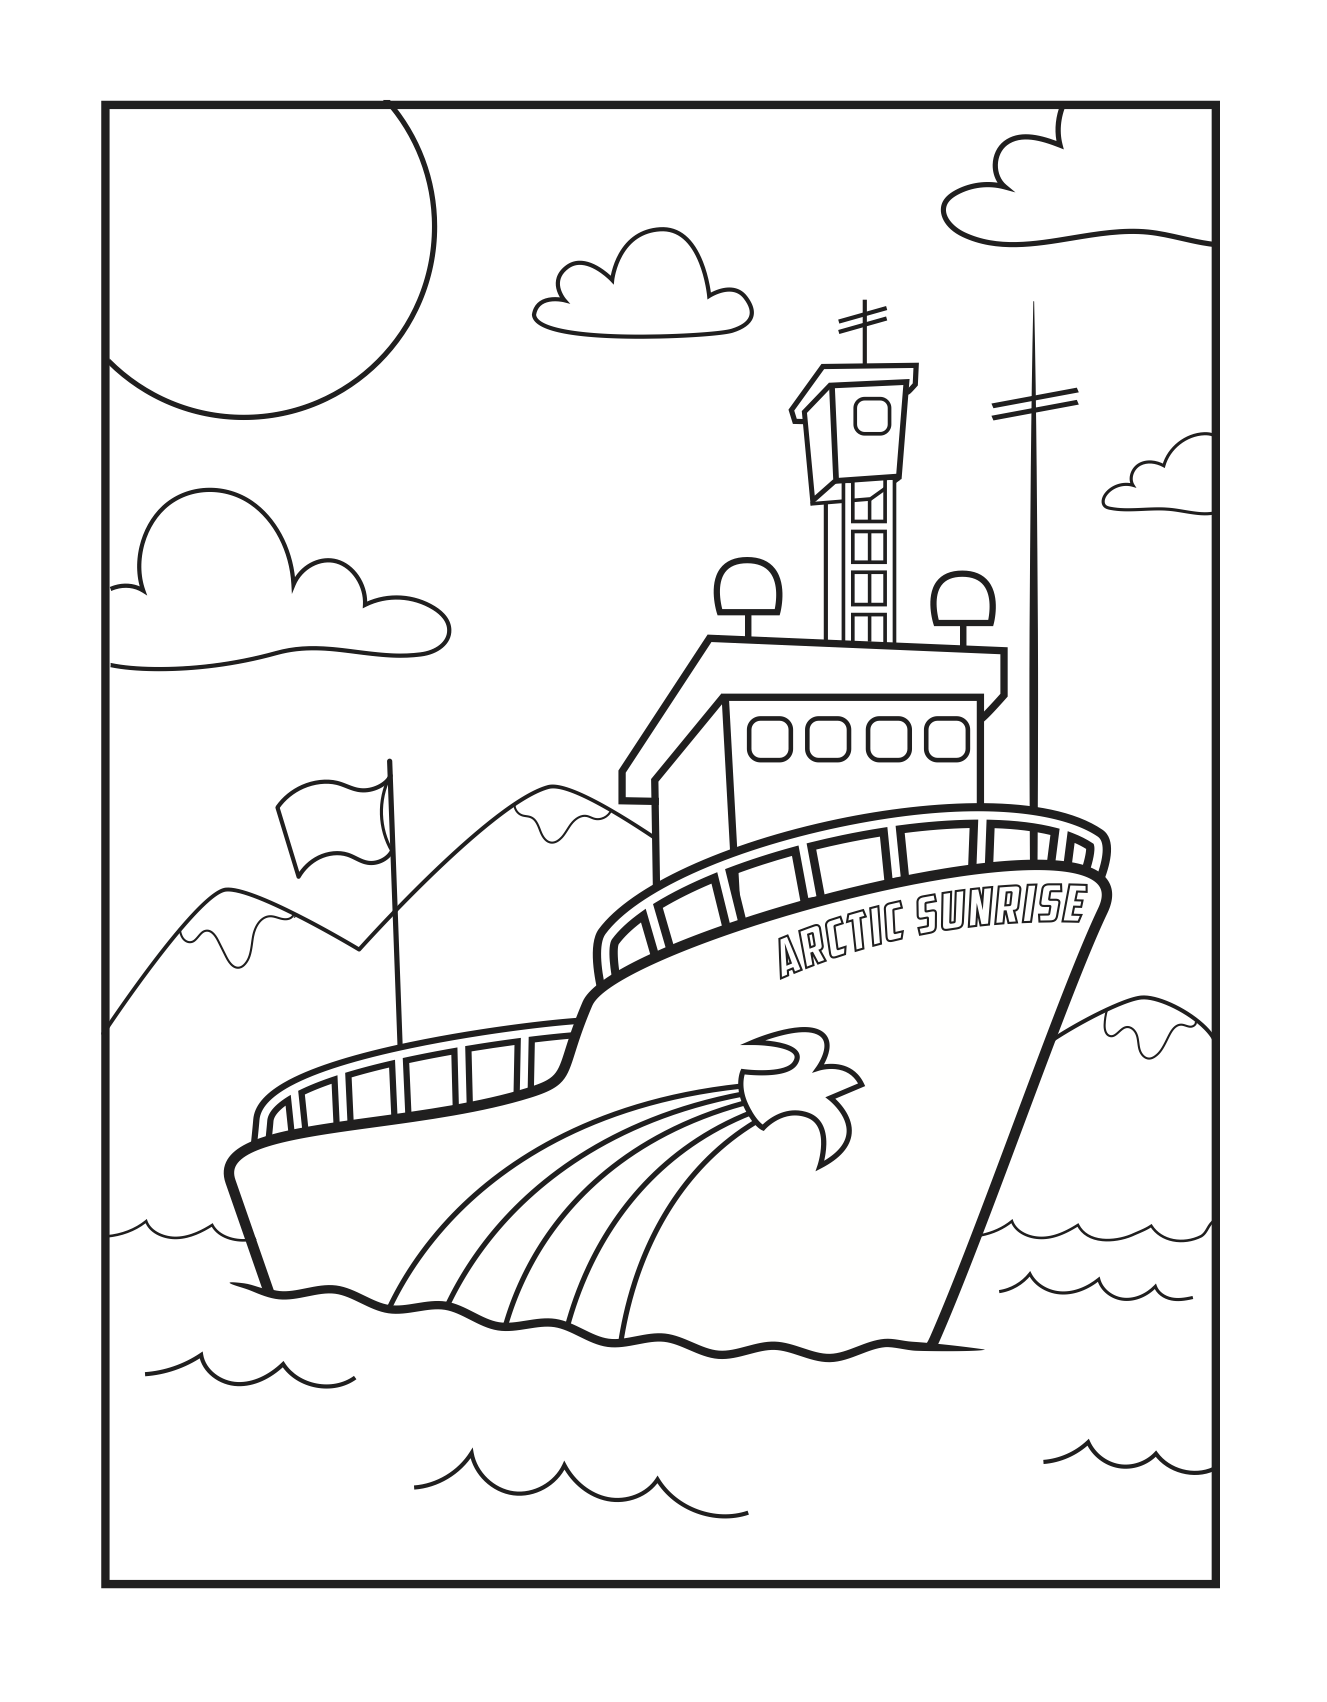 Coloring Pages For Young And Young At Heart Greenpeacers Greenpeace Usa